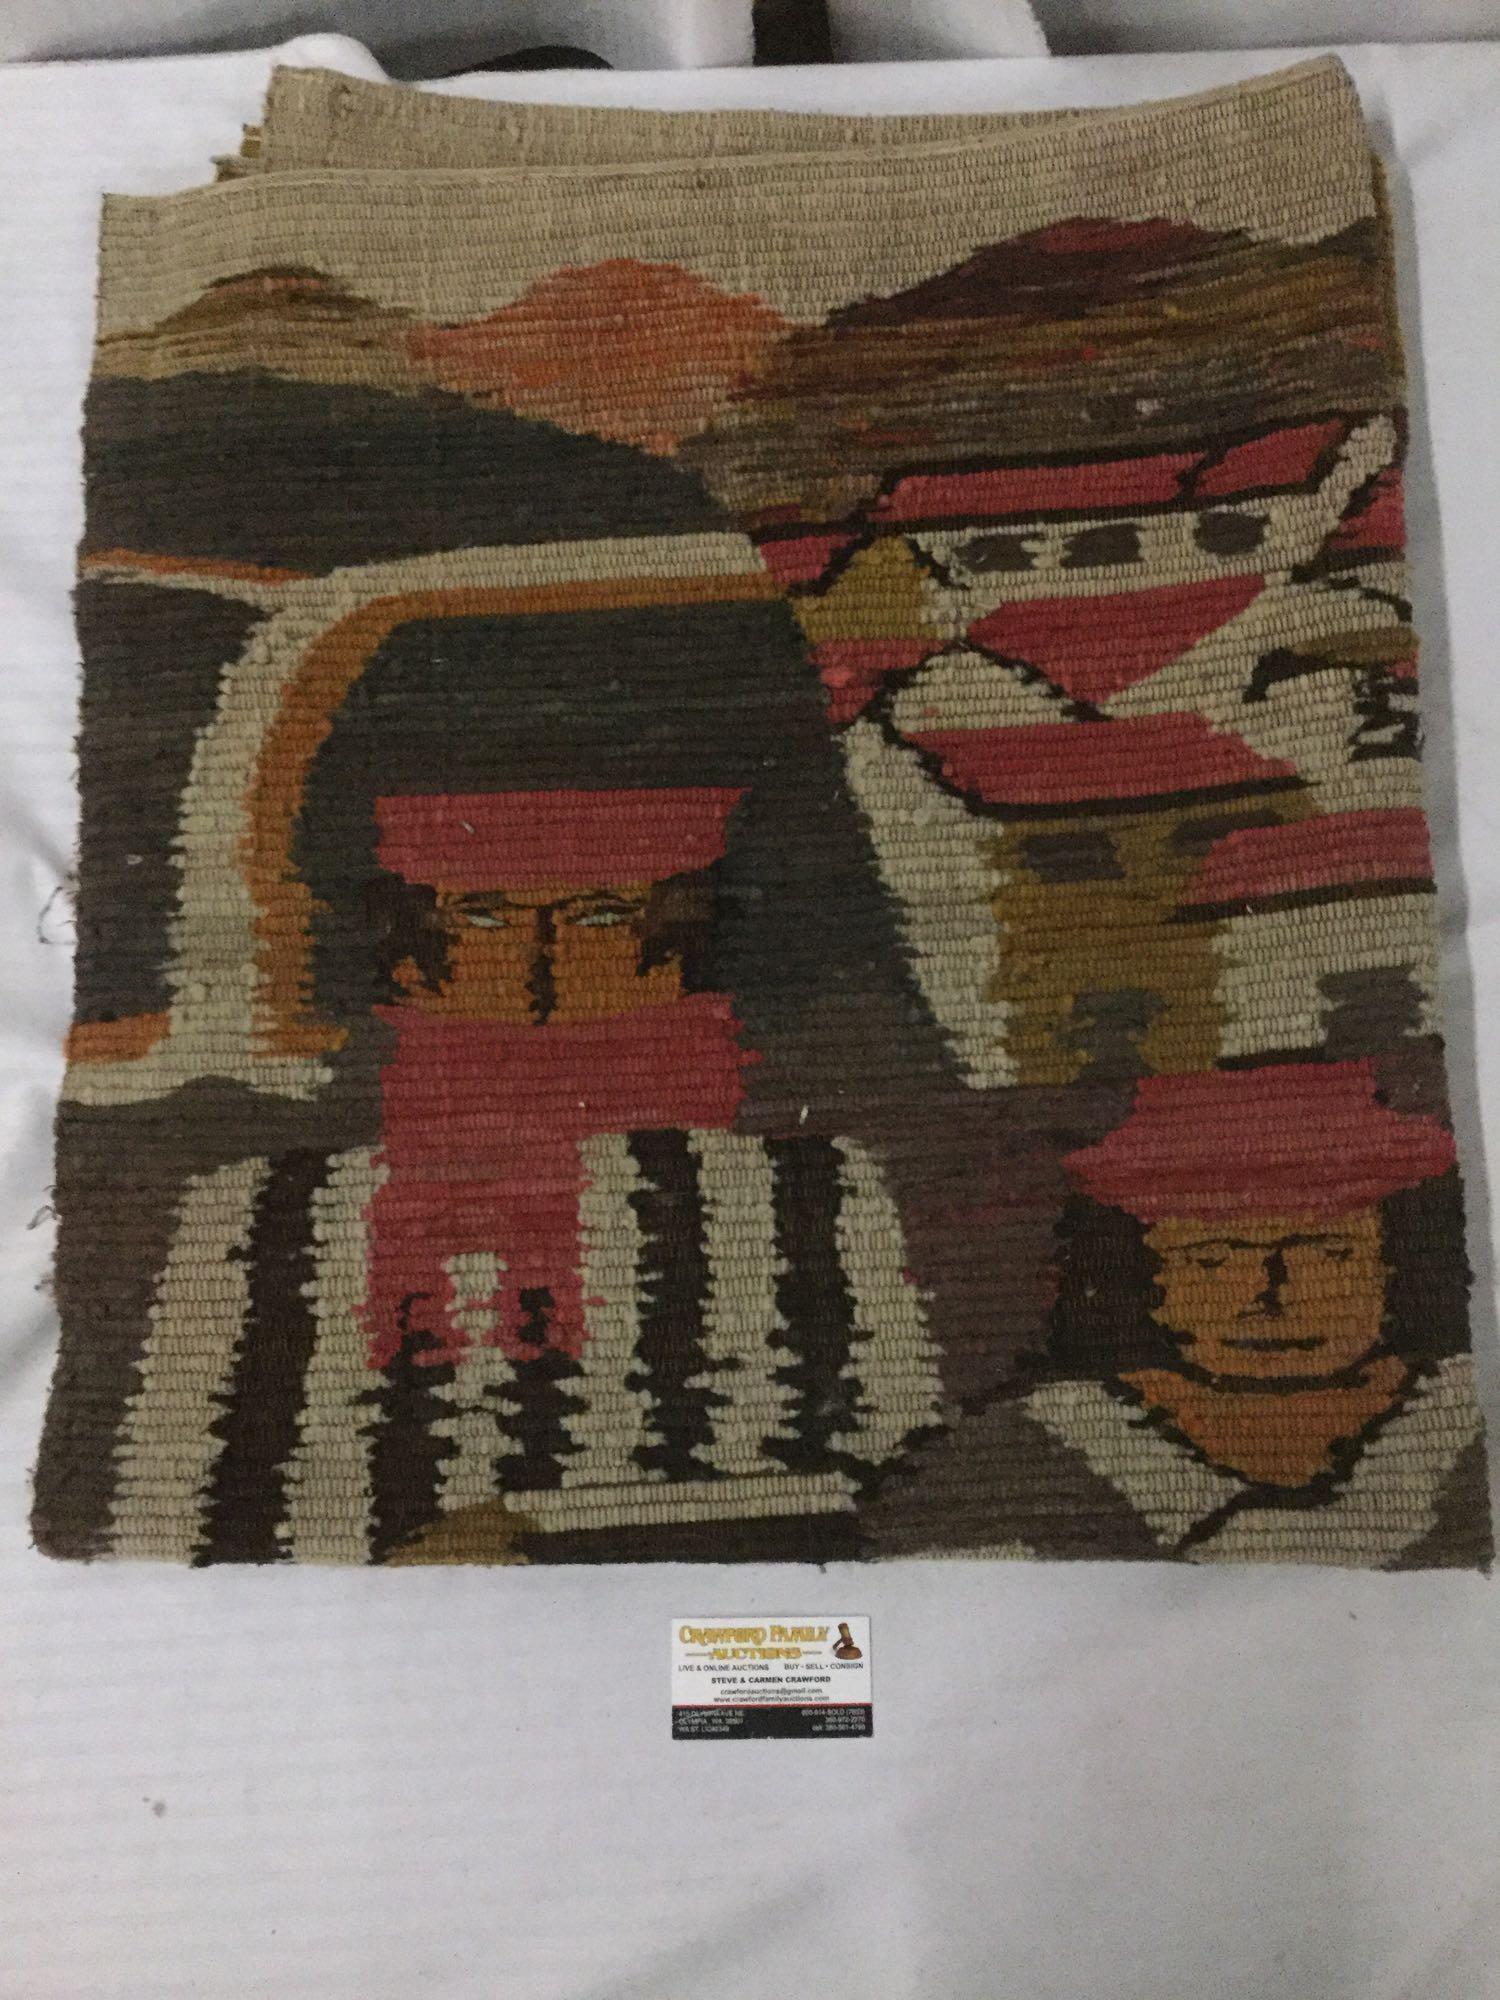 Vintage handmade brown and red wool tapestry or thick blanket depicting mountain life - as is